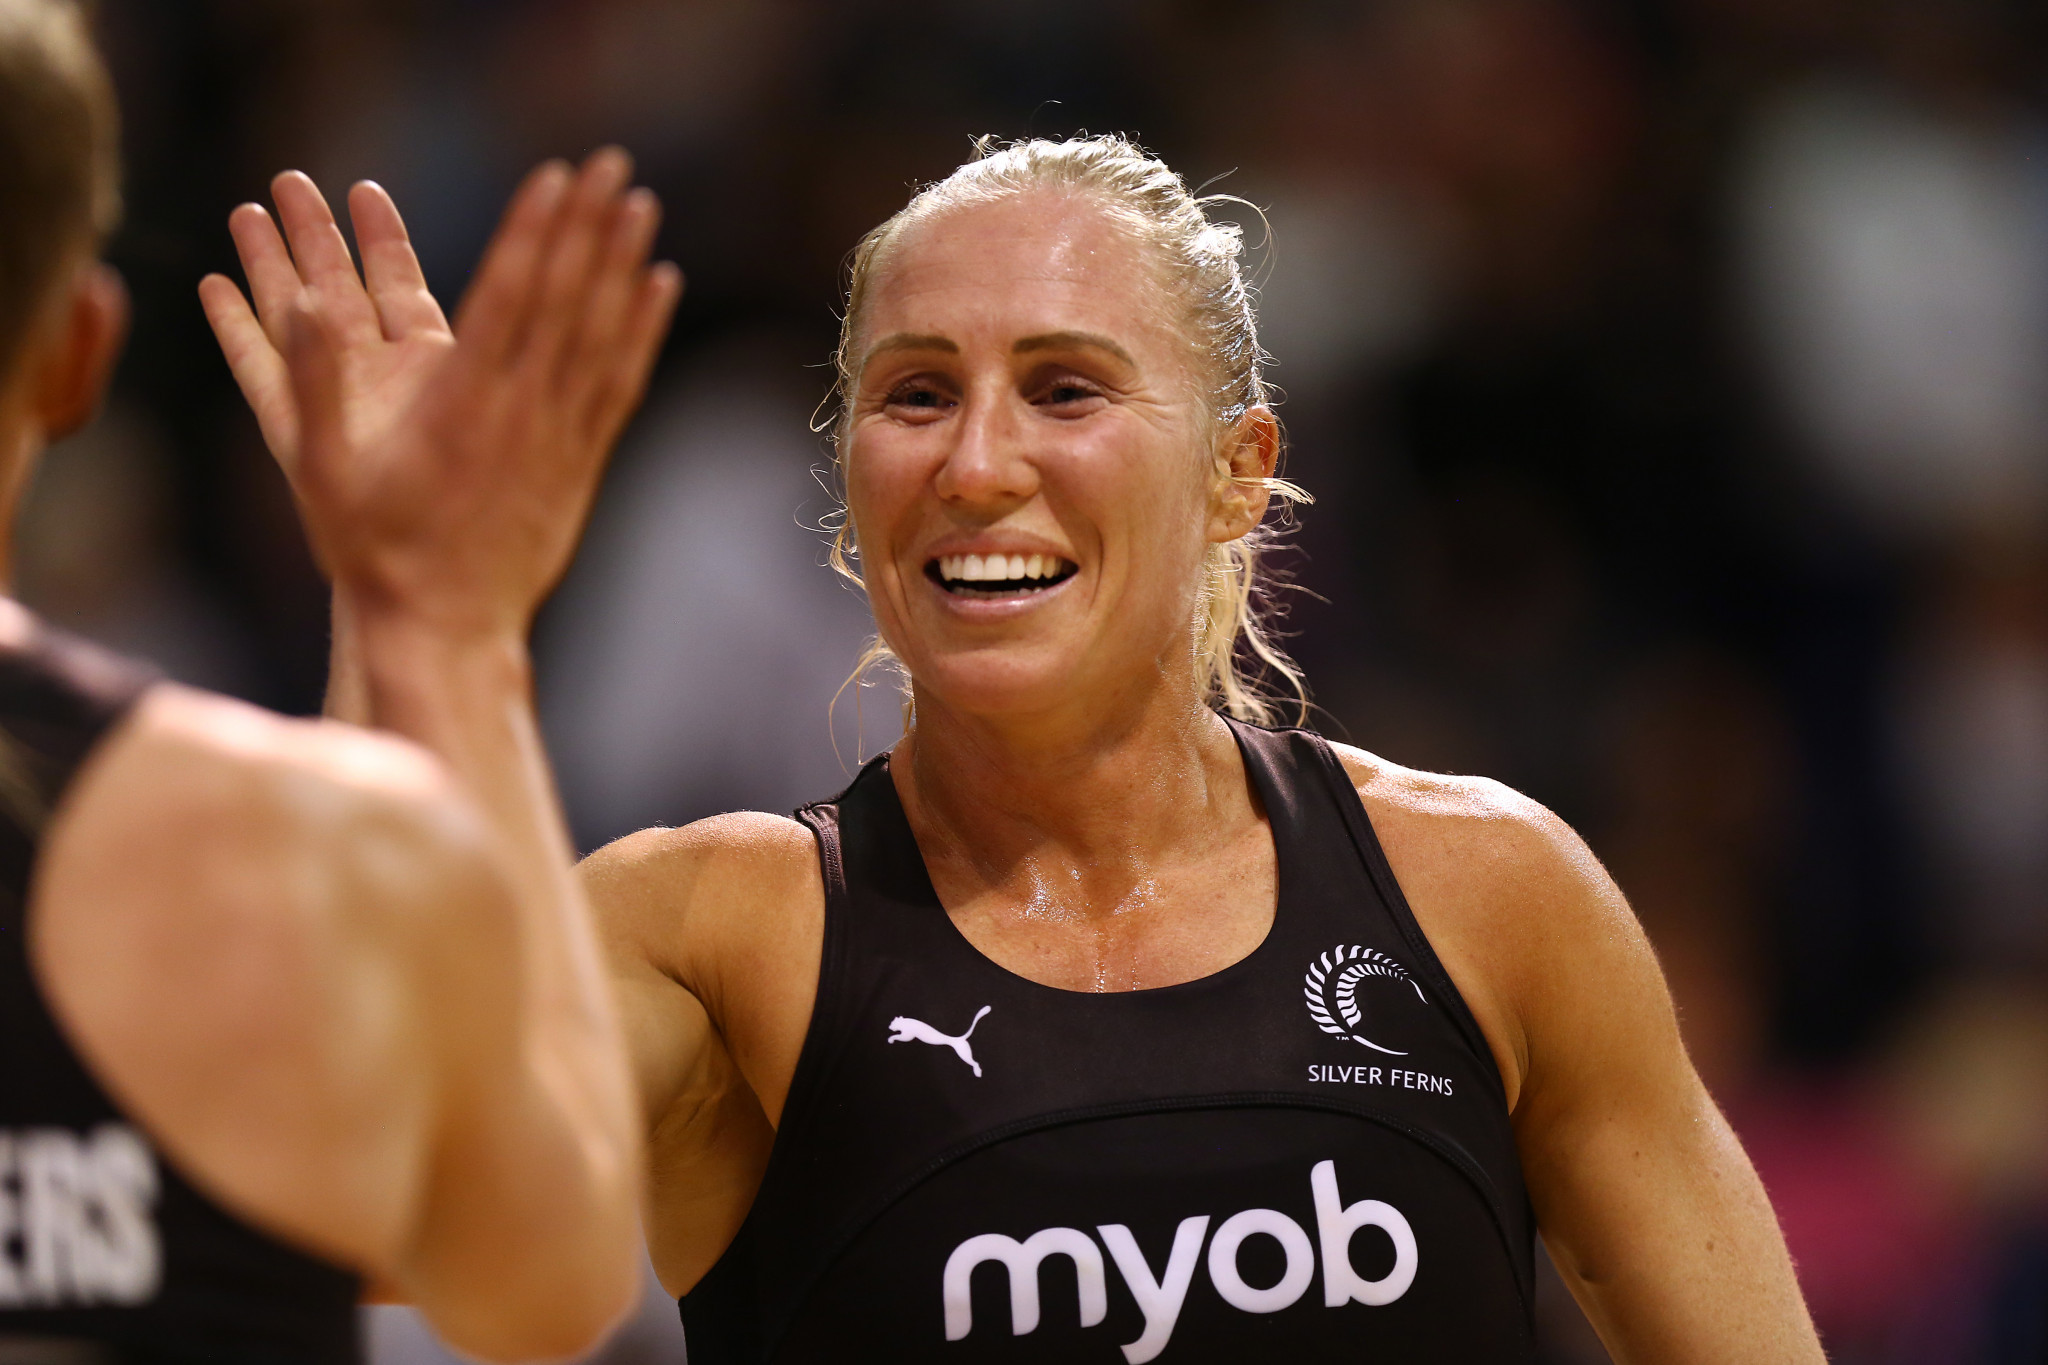 New Zealand's Laura Langman has ended her international career after 162 caps ©Getty Images